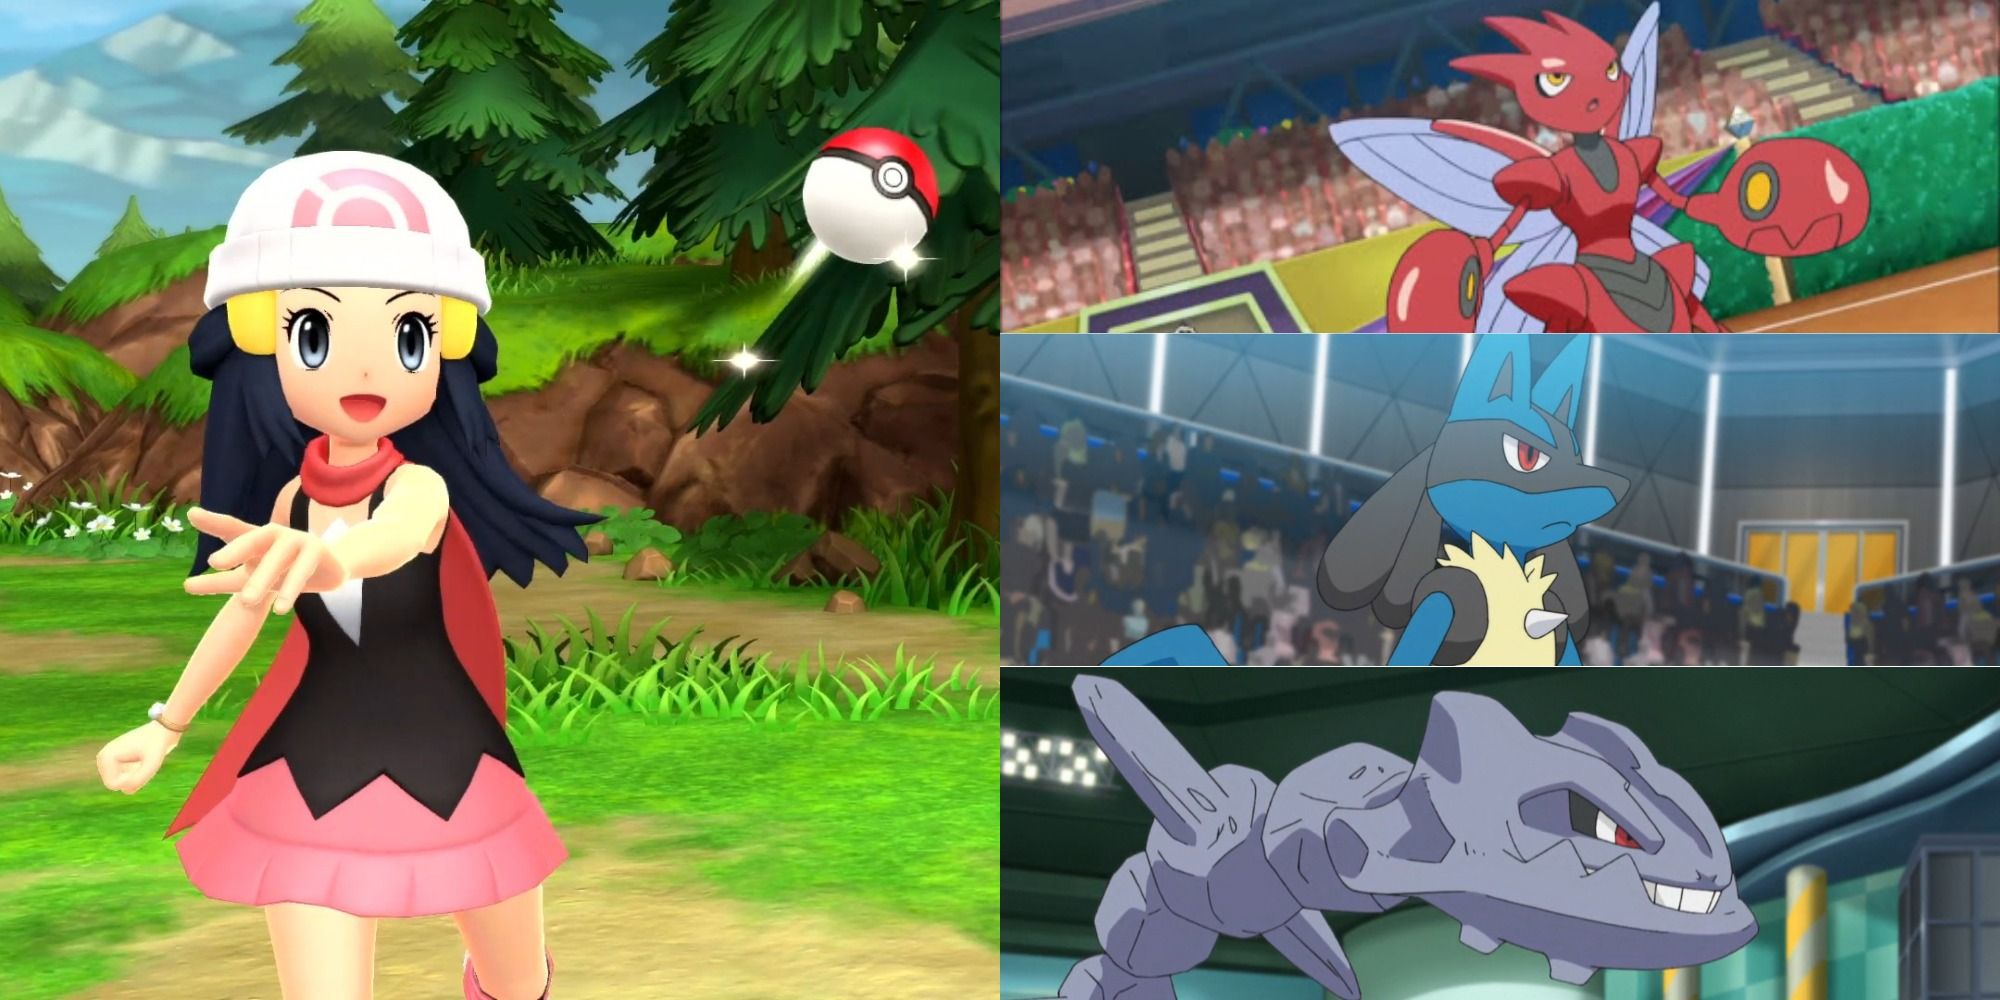 Player character and Steel-type pokemon